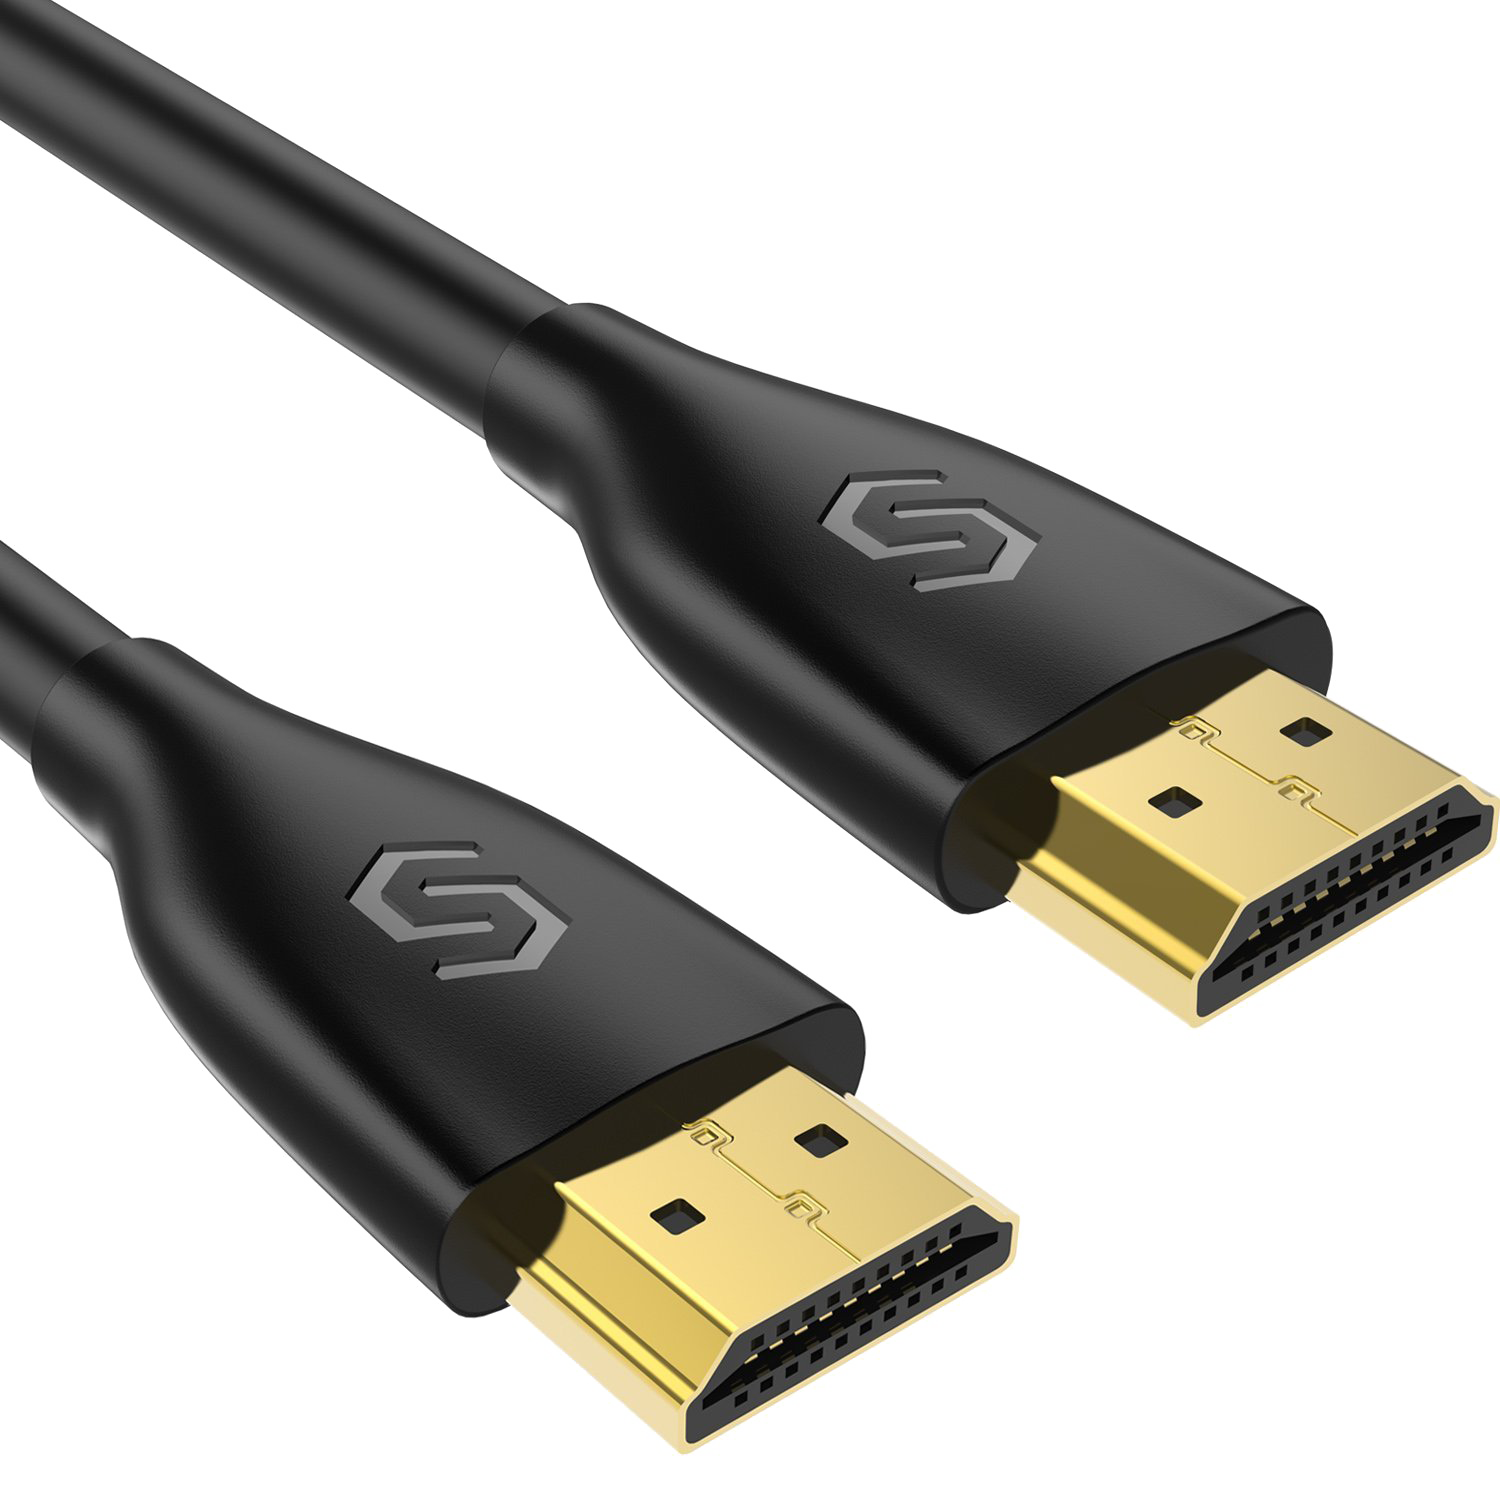 HDMI Cable PNG Image